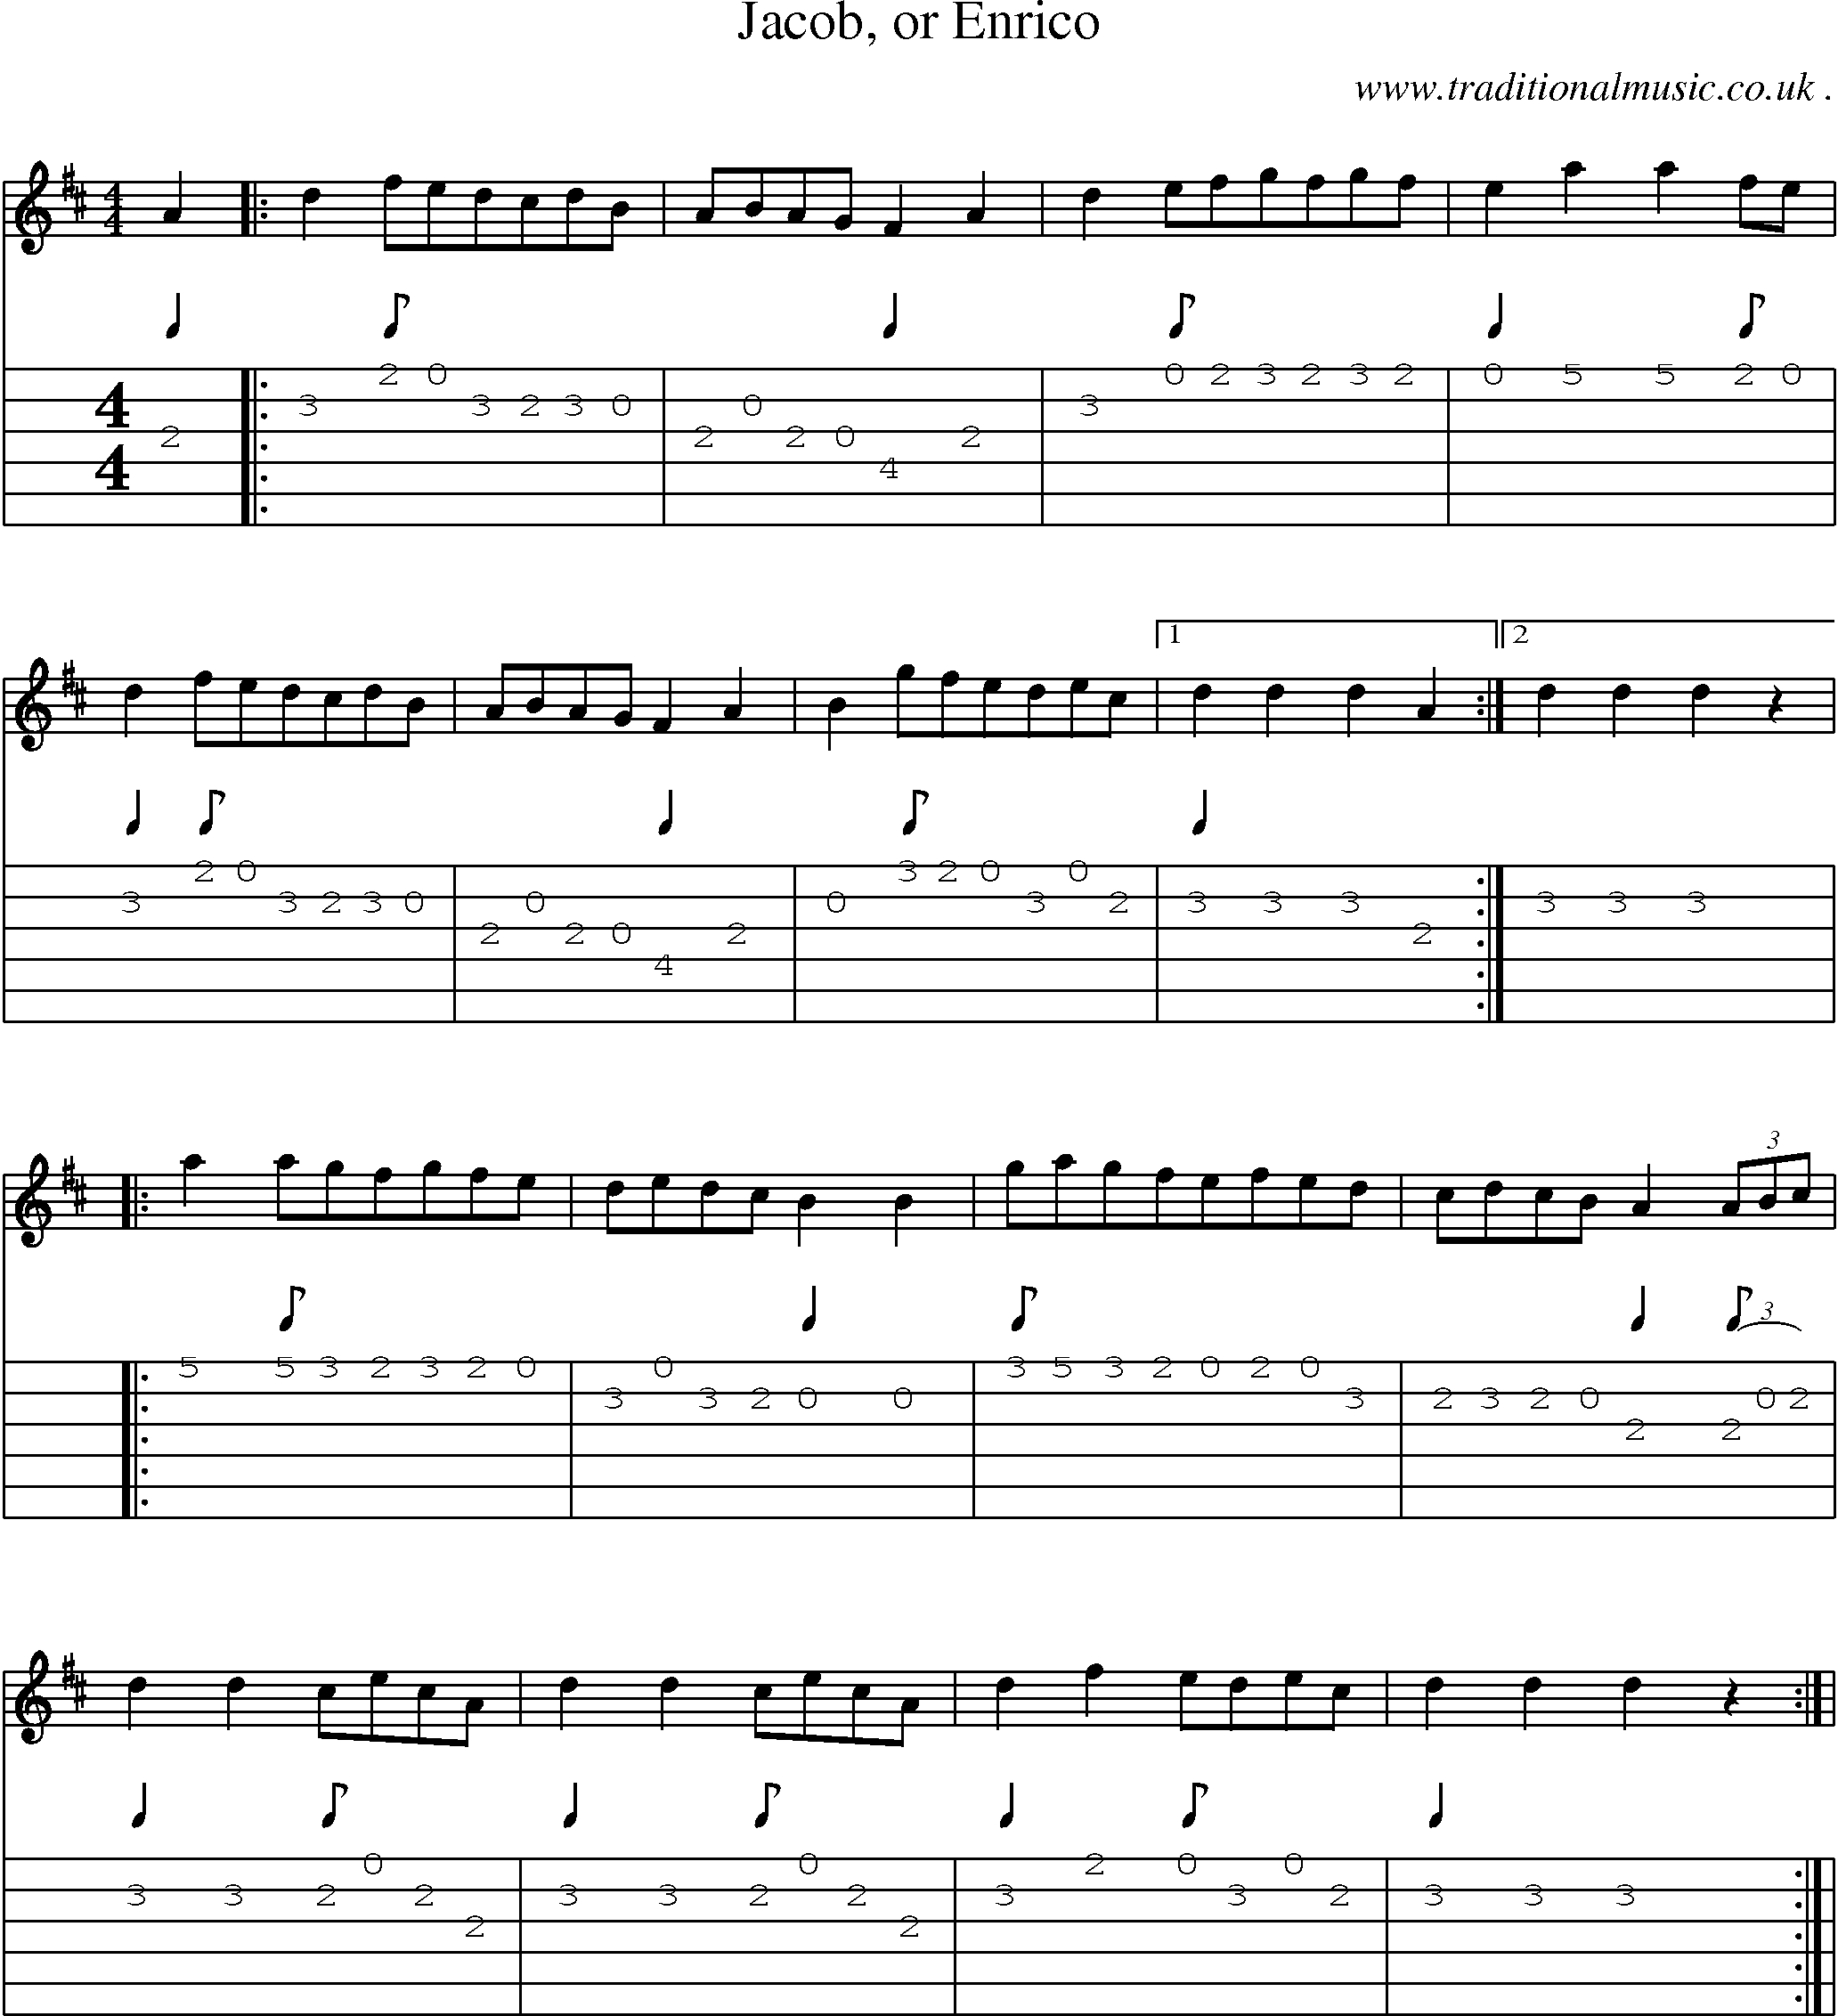 Sheet-Music and Guitar Tabs for Jacob Or Enrico